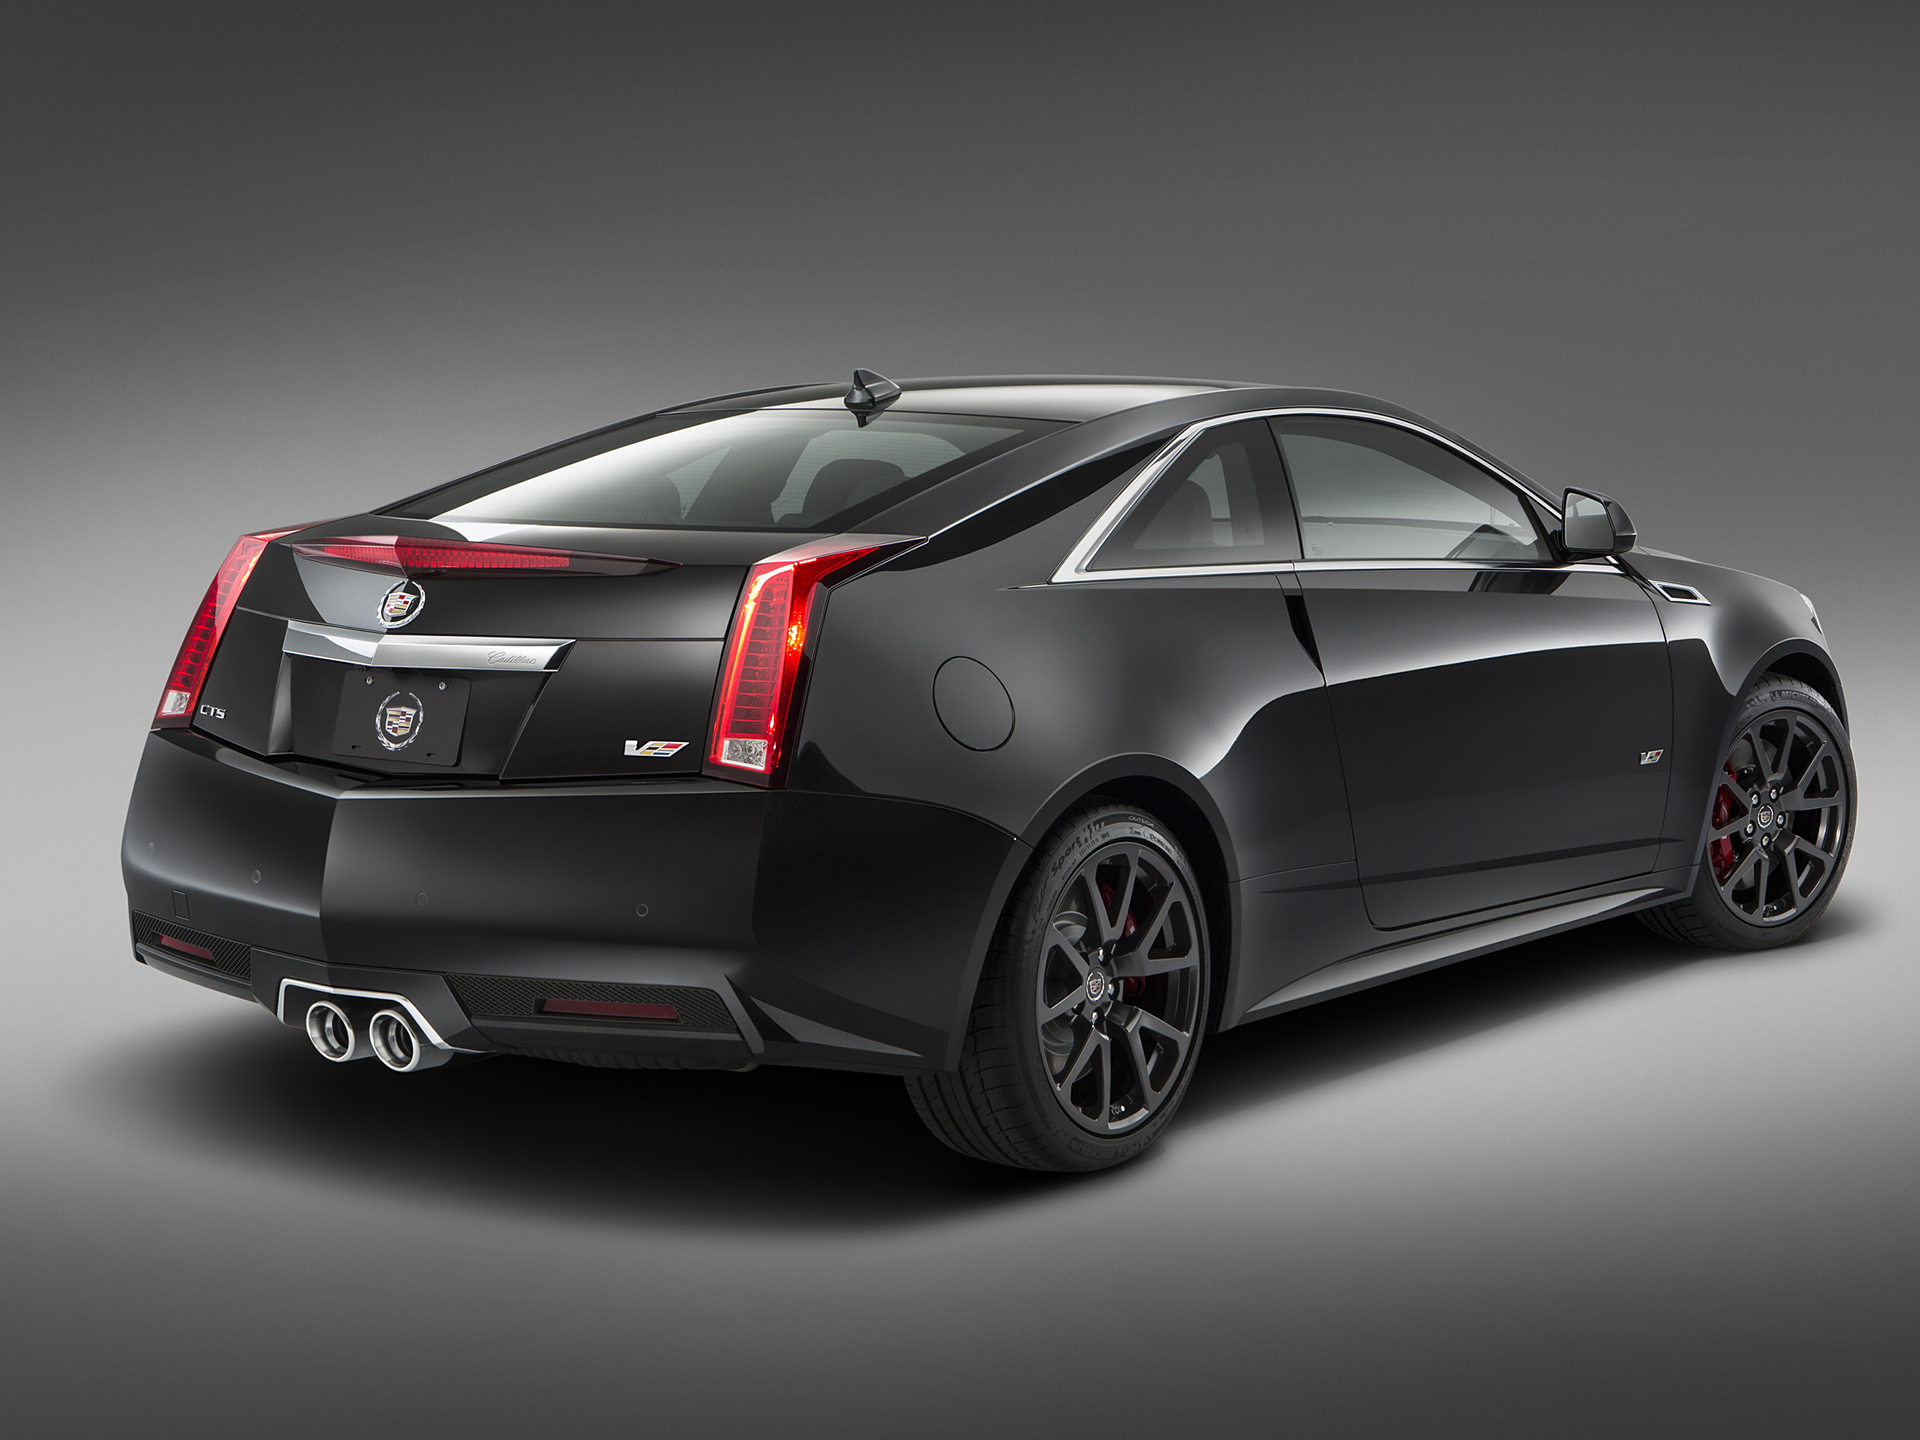  2015 Cadillac CTS-V Coupe Special Edition Wallpaper.